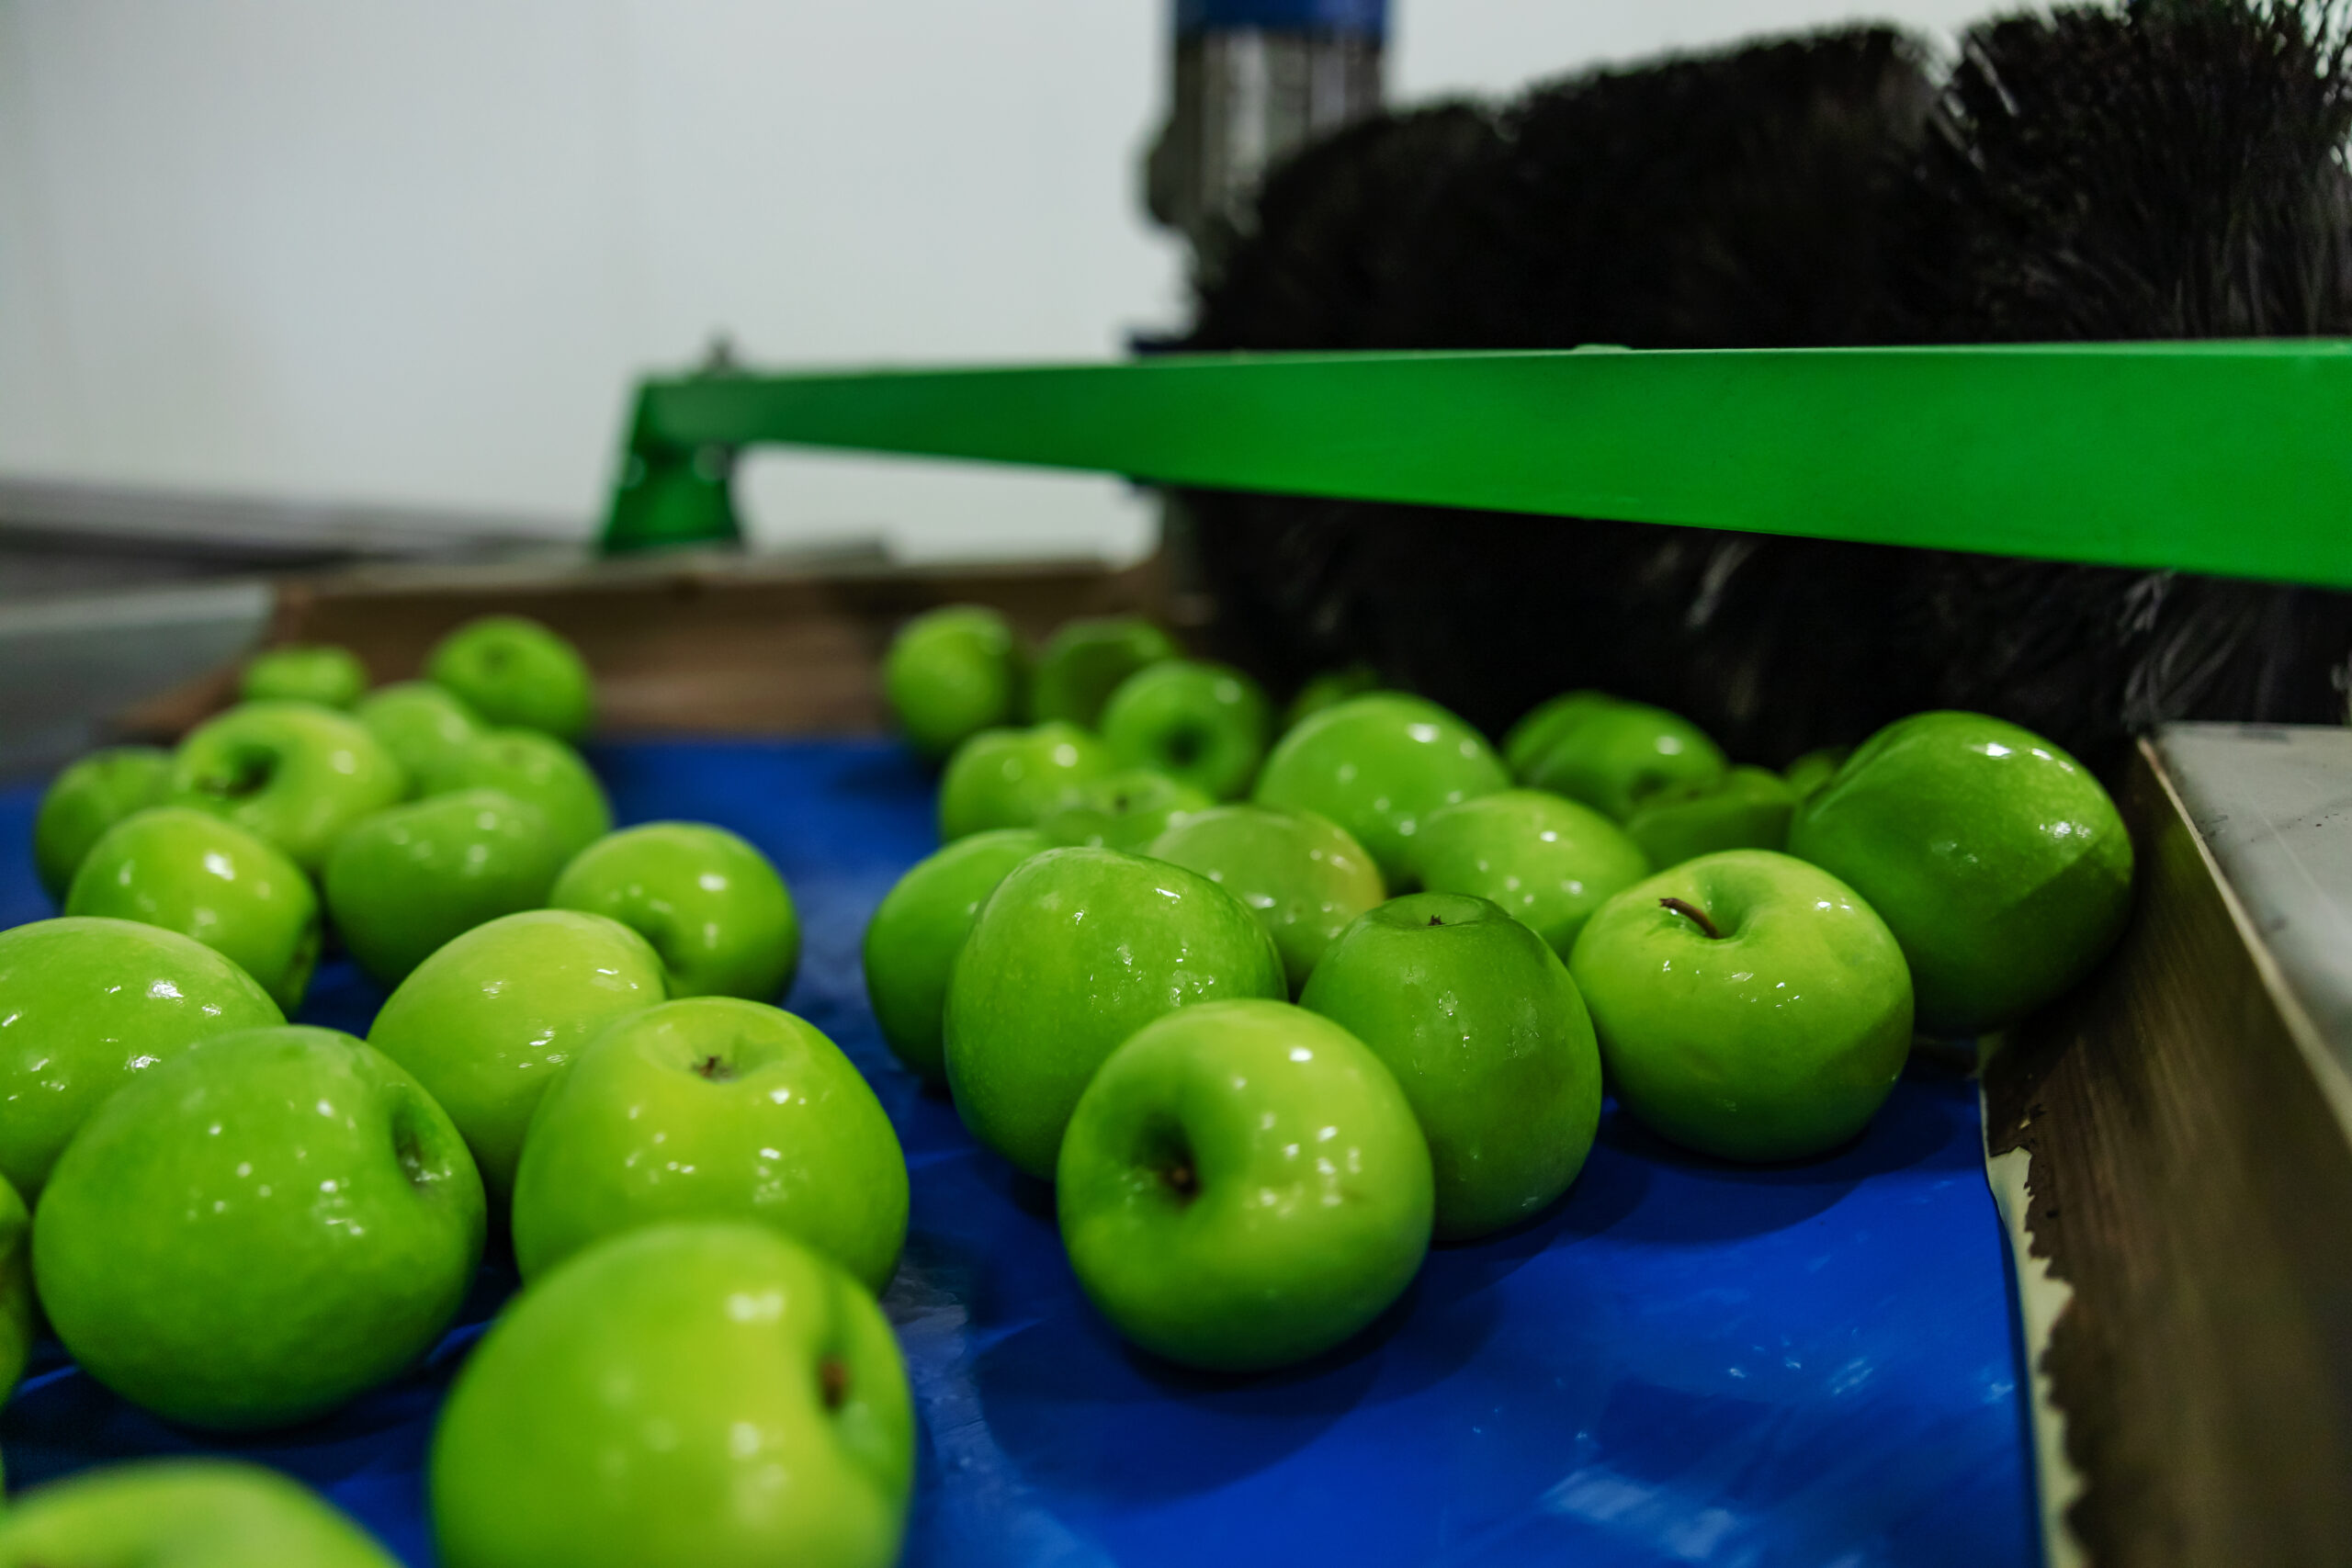 Modern technology for production, sorting and distribution of apples. Ripe green apples freshly washed in focus. Drying and grading apples after cleaning apples in clean water. Fruit quality control